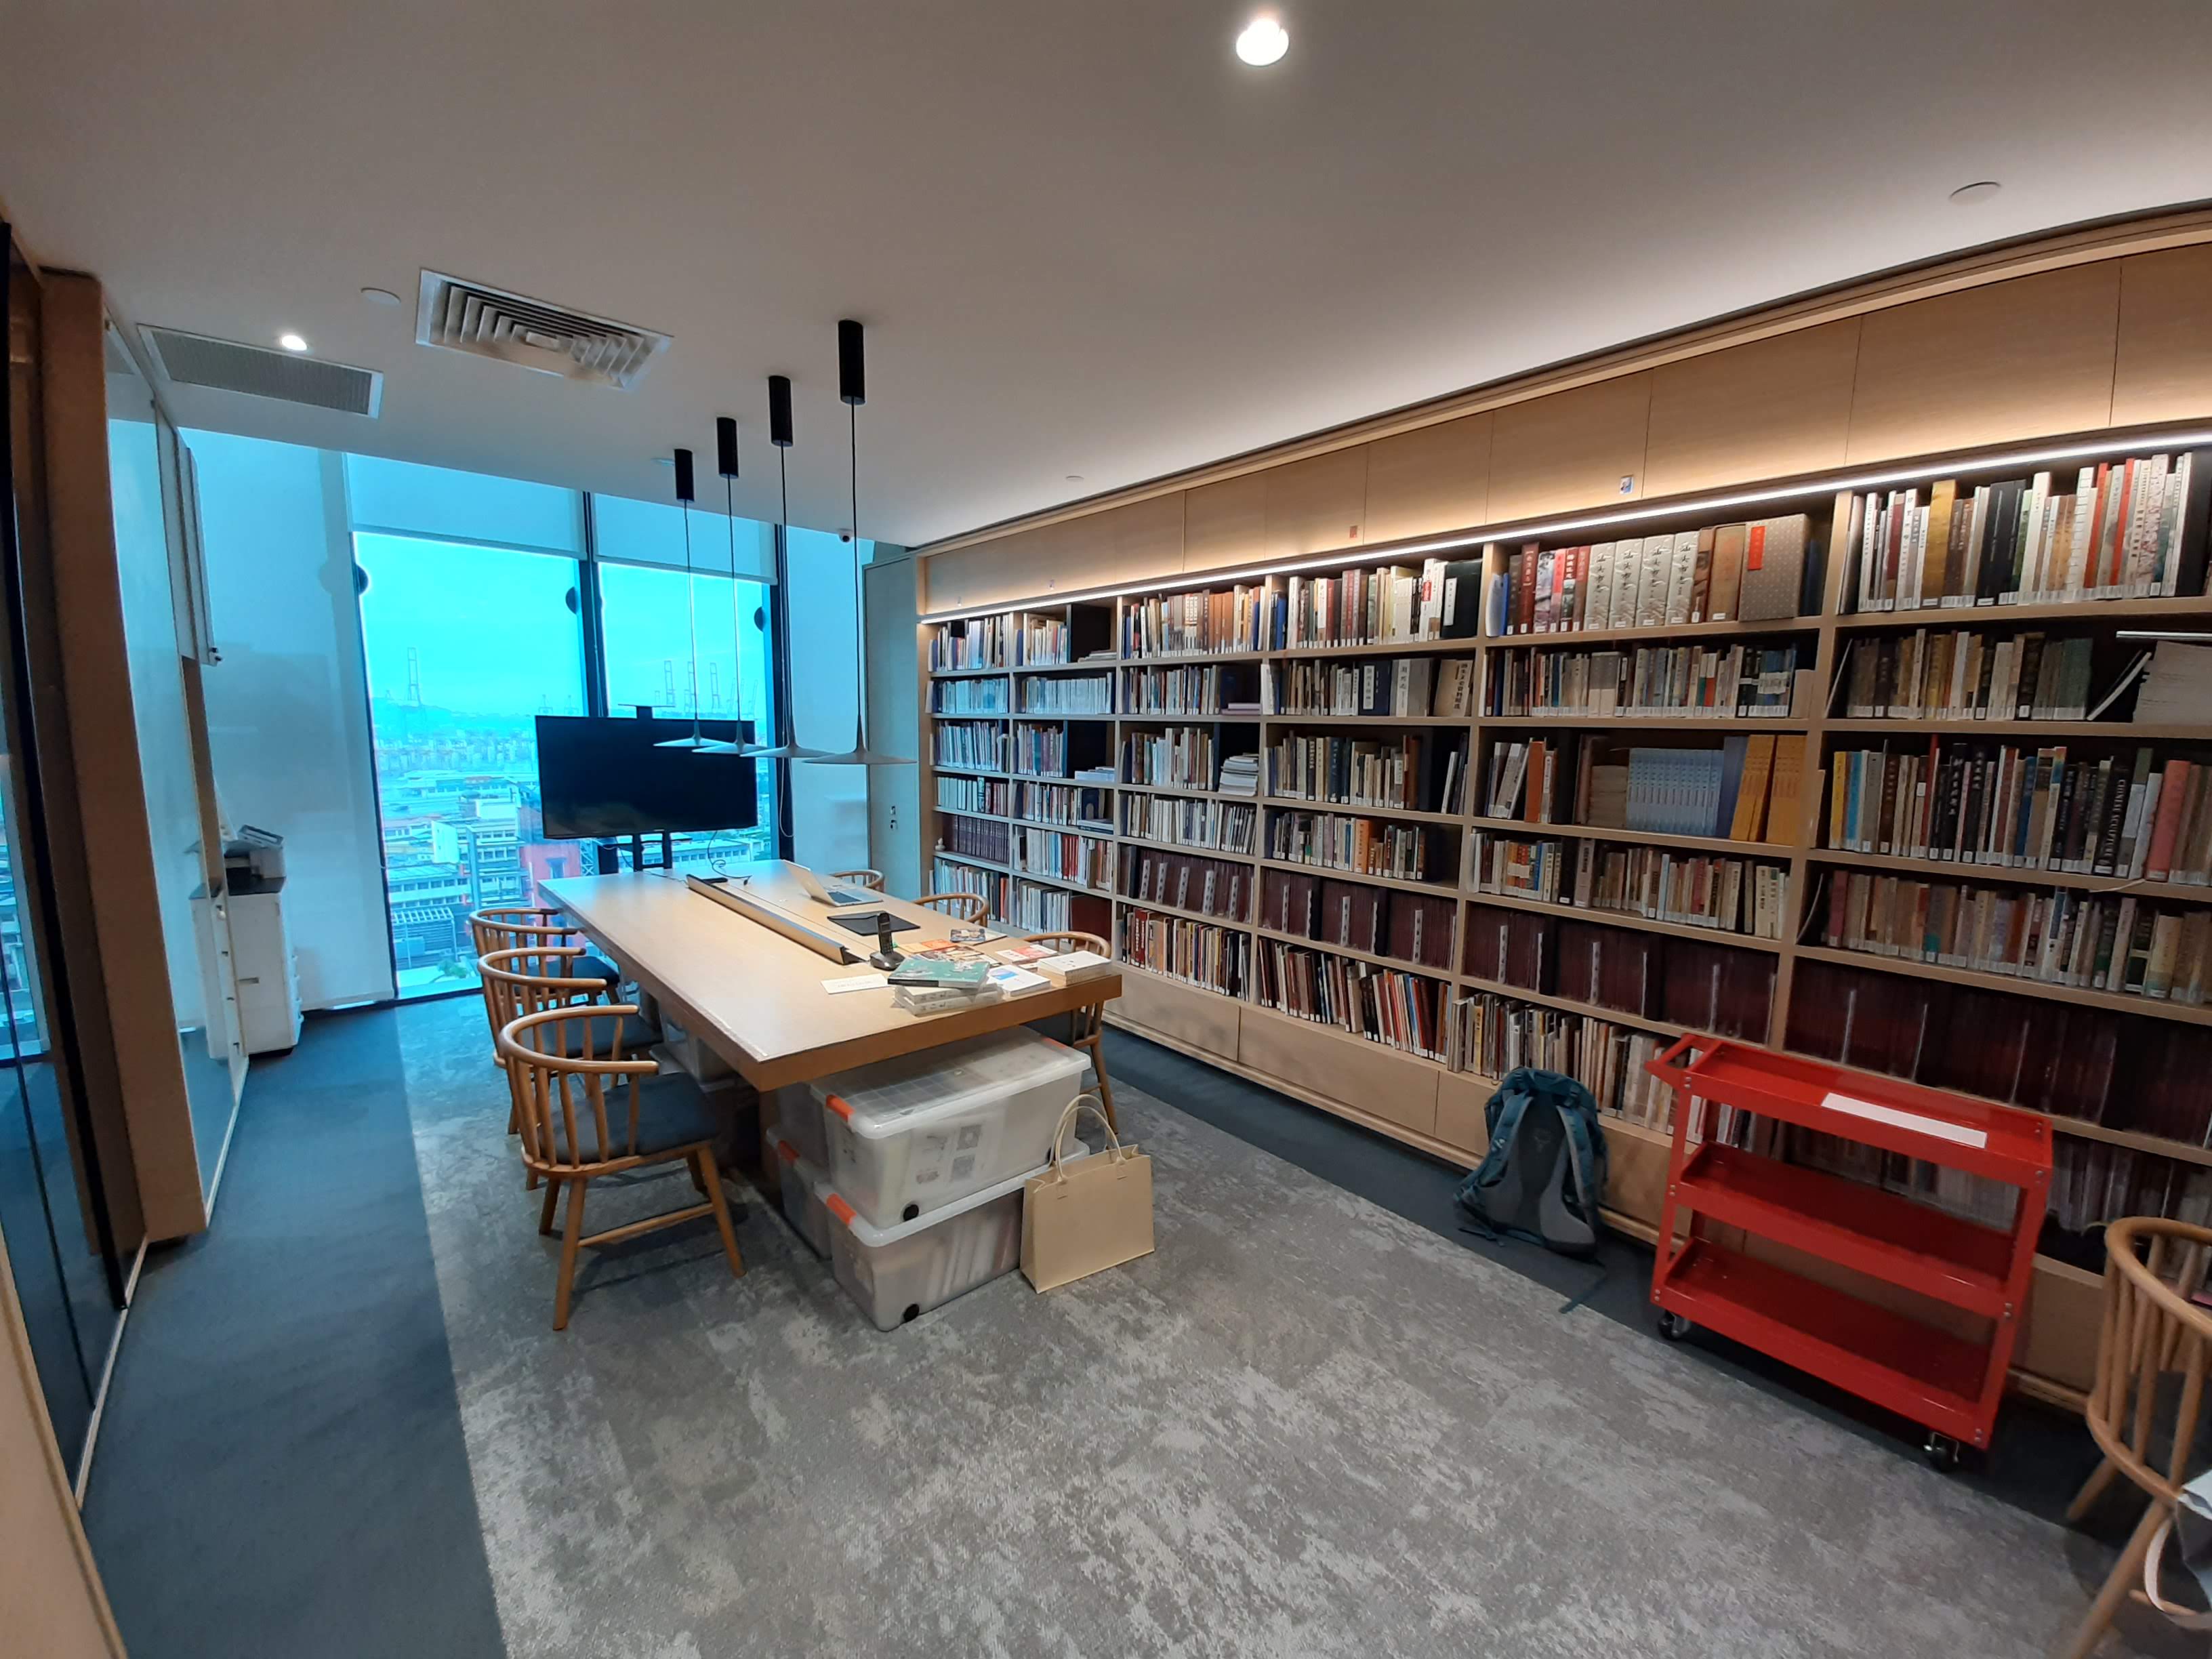 Premises of Yeo Khee Lim TCRC; large table in the middle, bookshelves on the sides, and a large window at the end of the room.